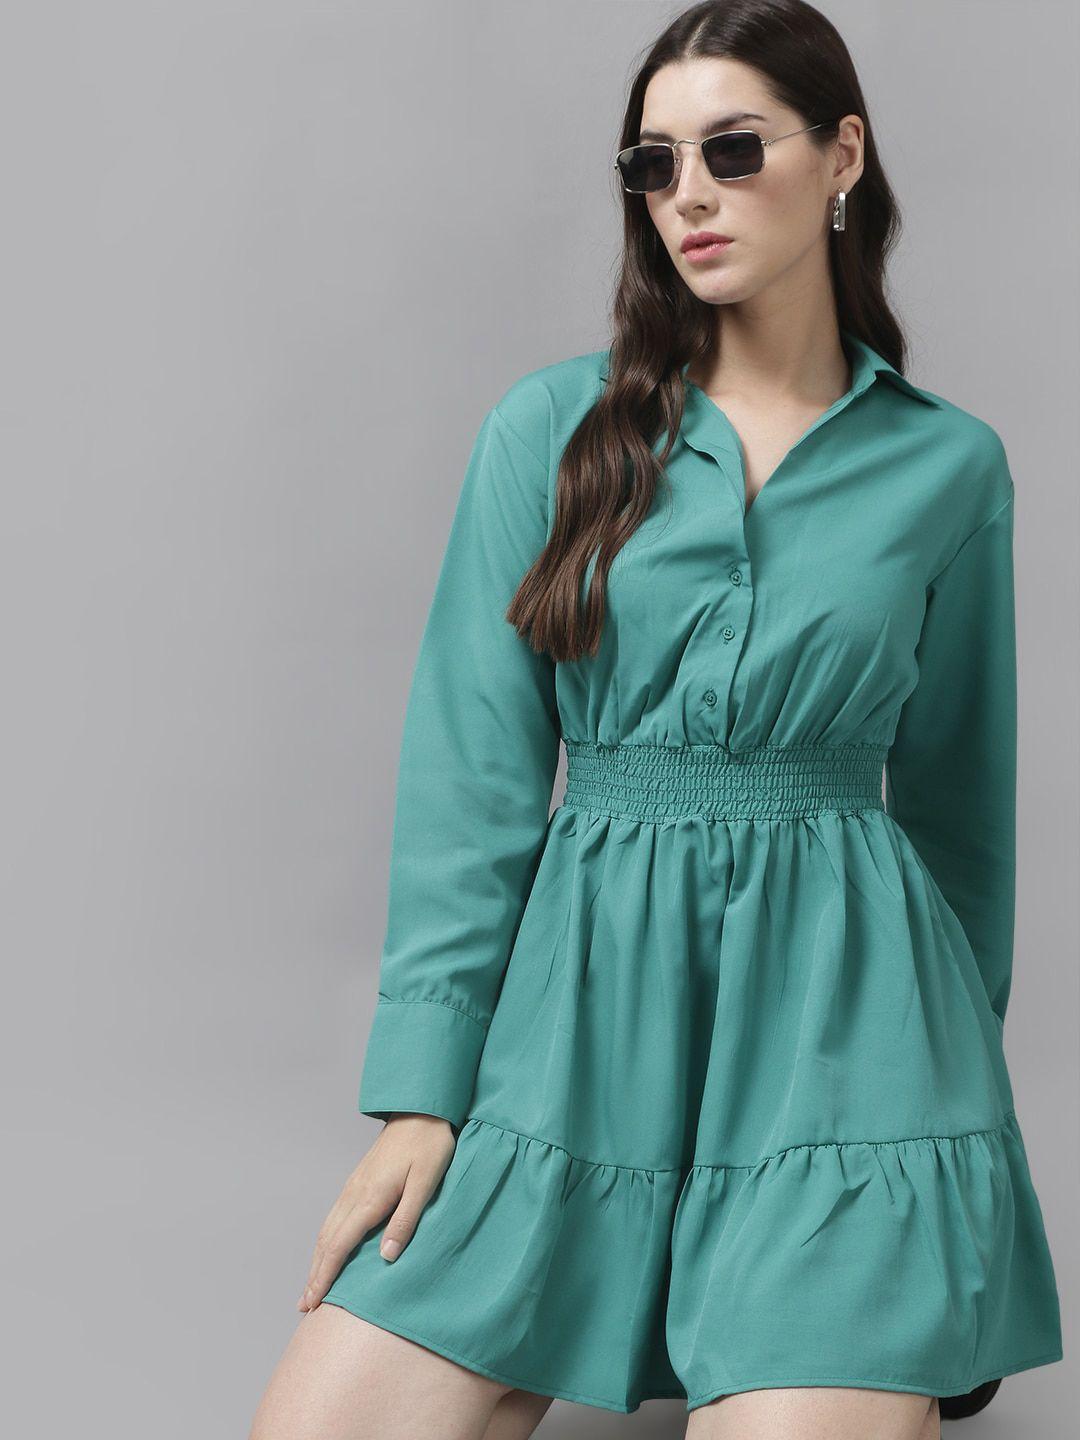 the roadster lifestyle co. cuffed sleeves smocked tiered shirt style dress